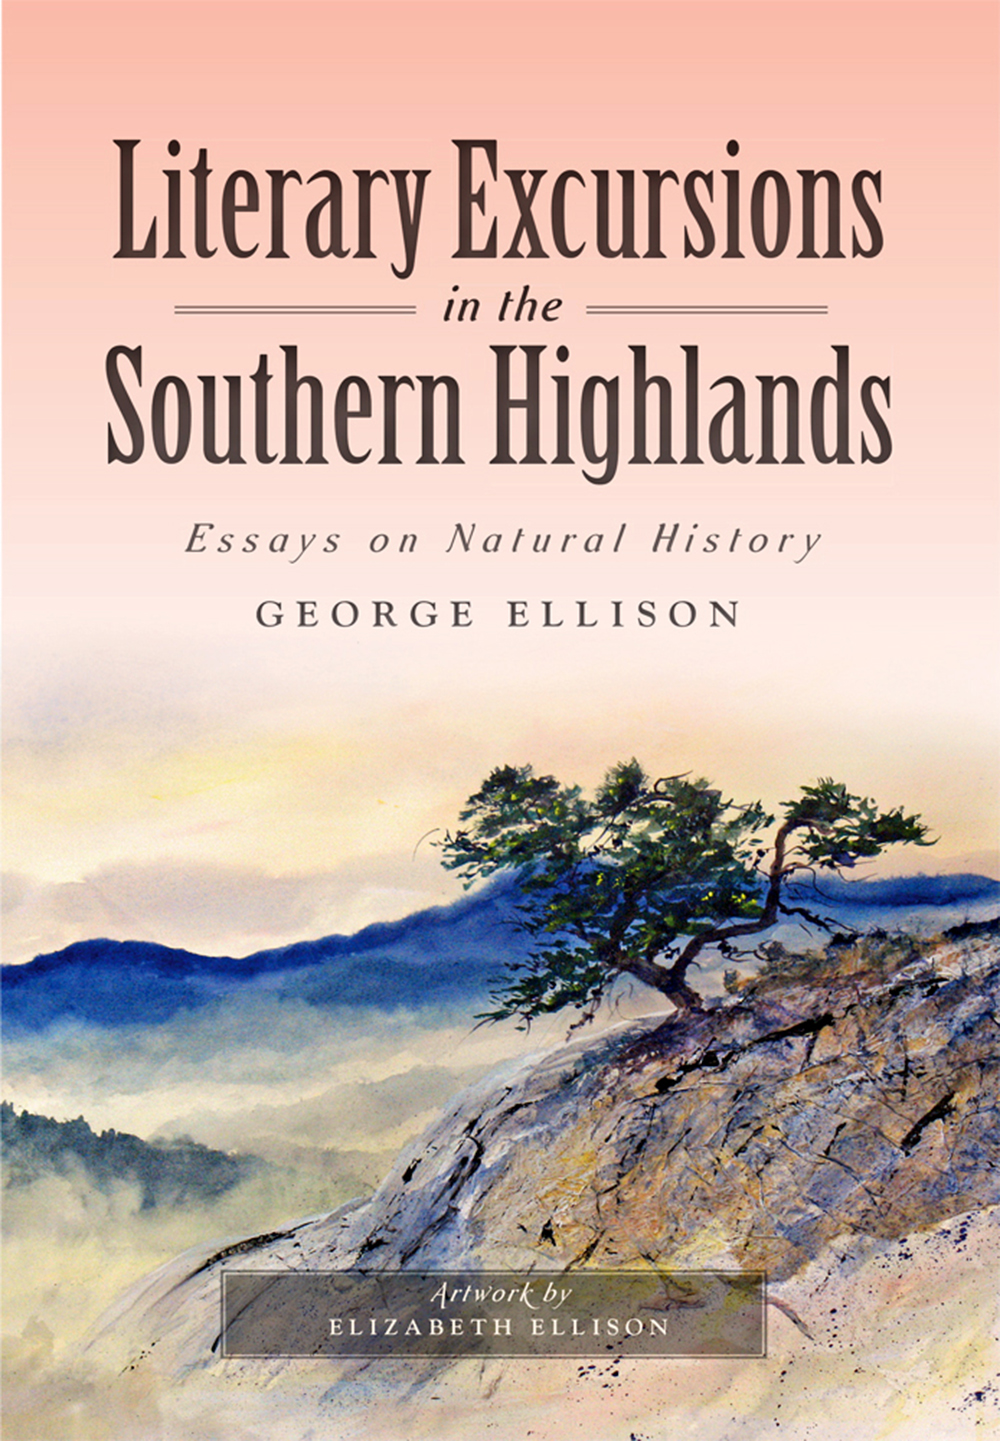 Literary Excursions in the Southern Highlands by George Ellison